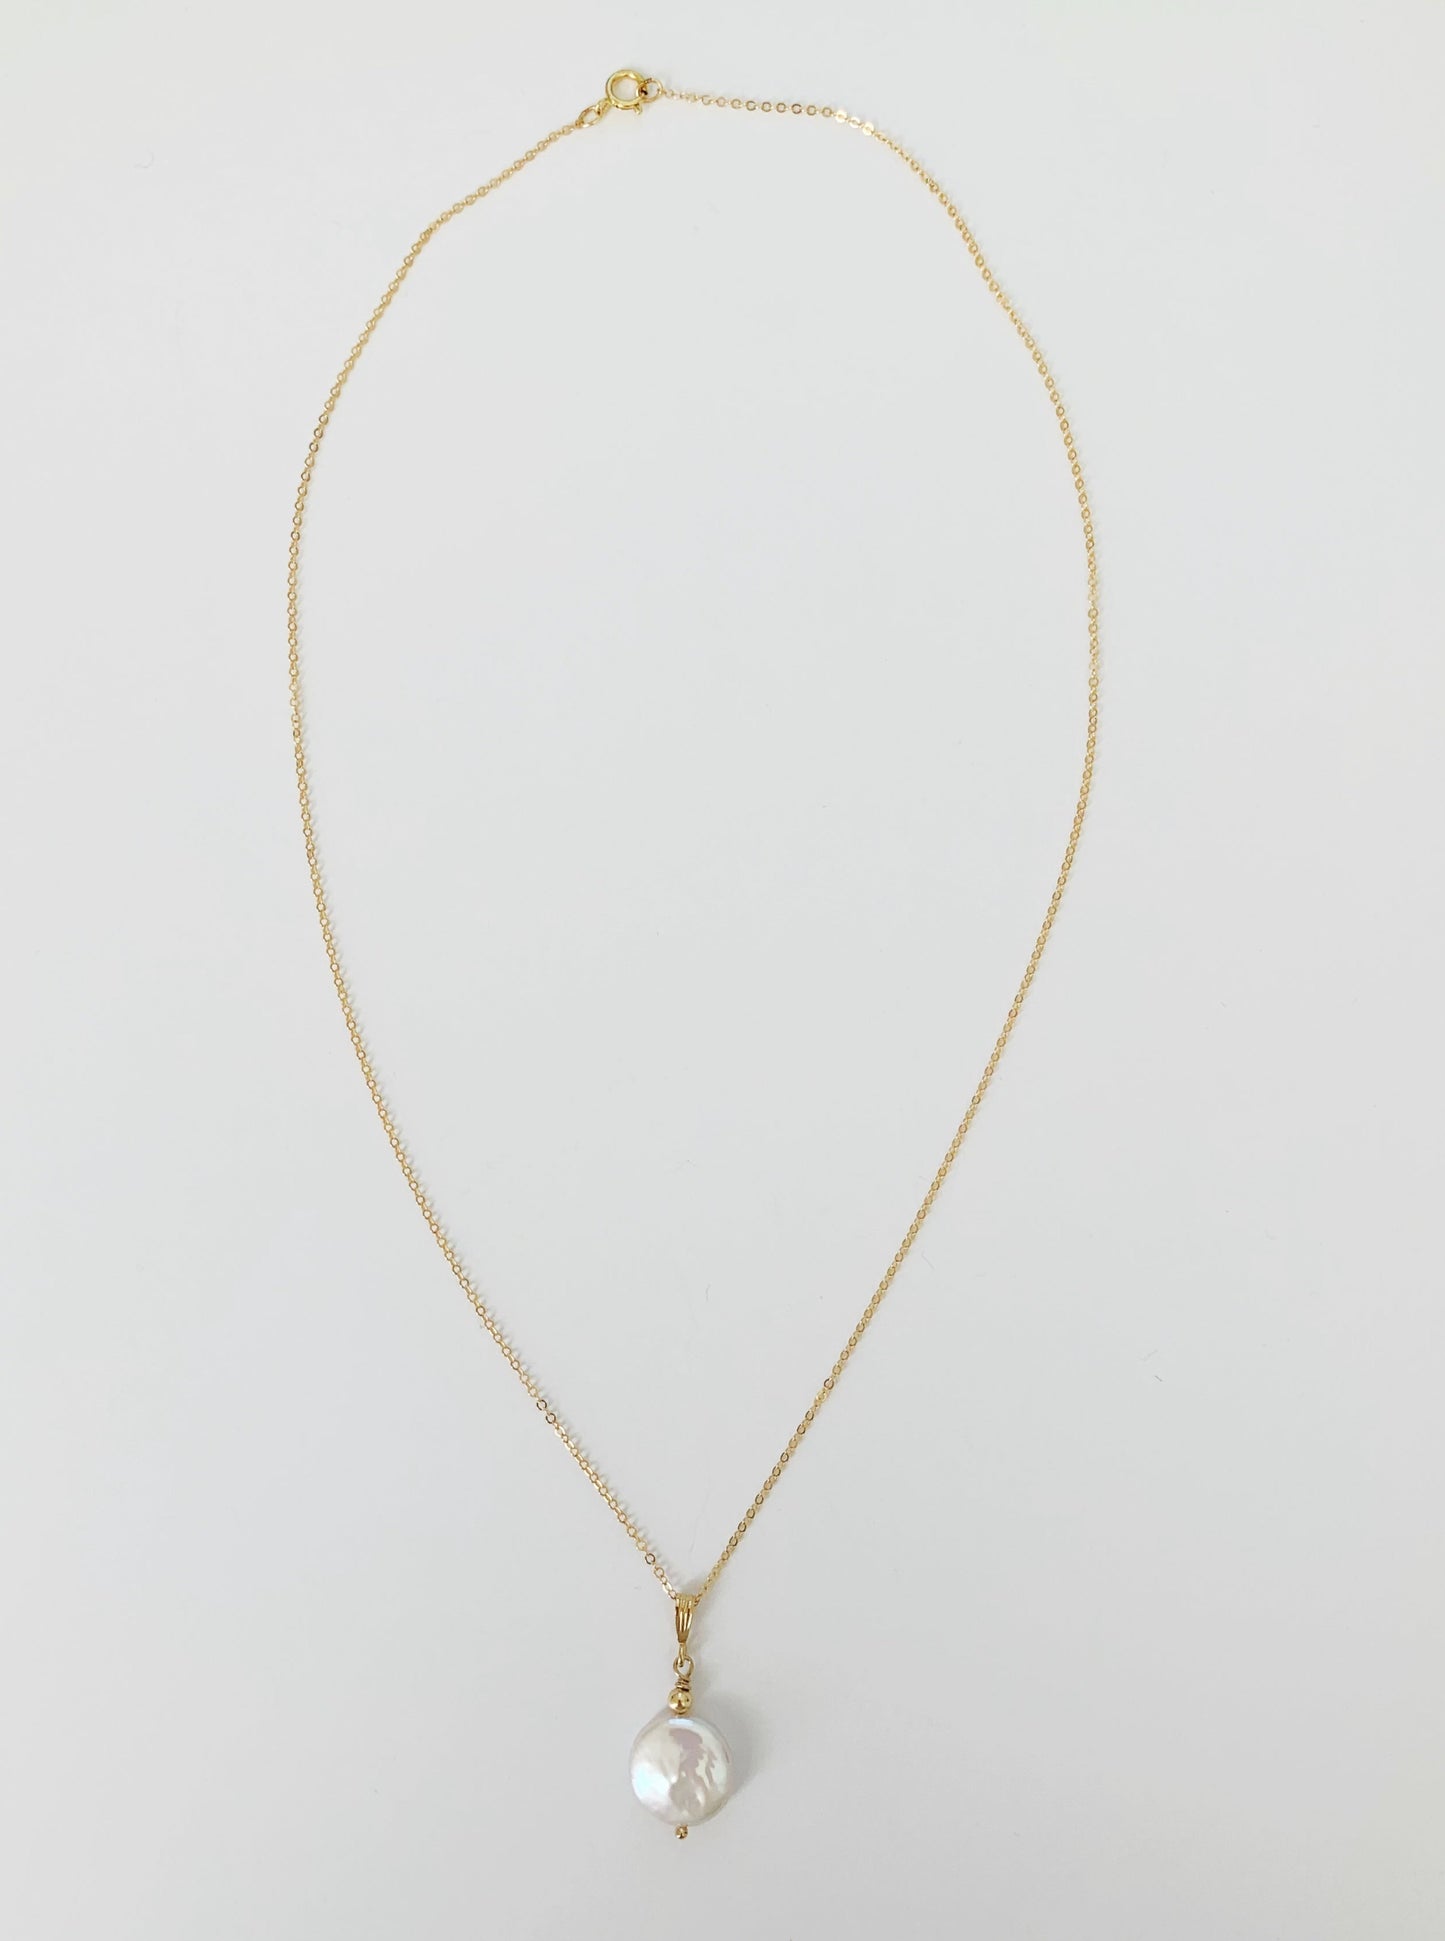 A full length view of the newport gala necklace on a white surface